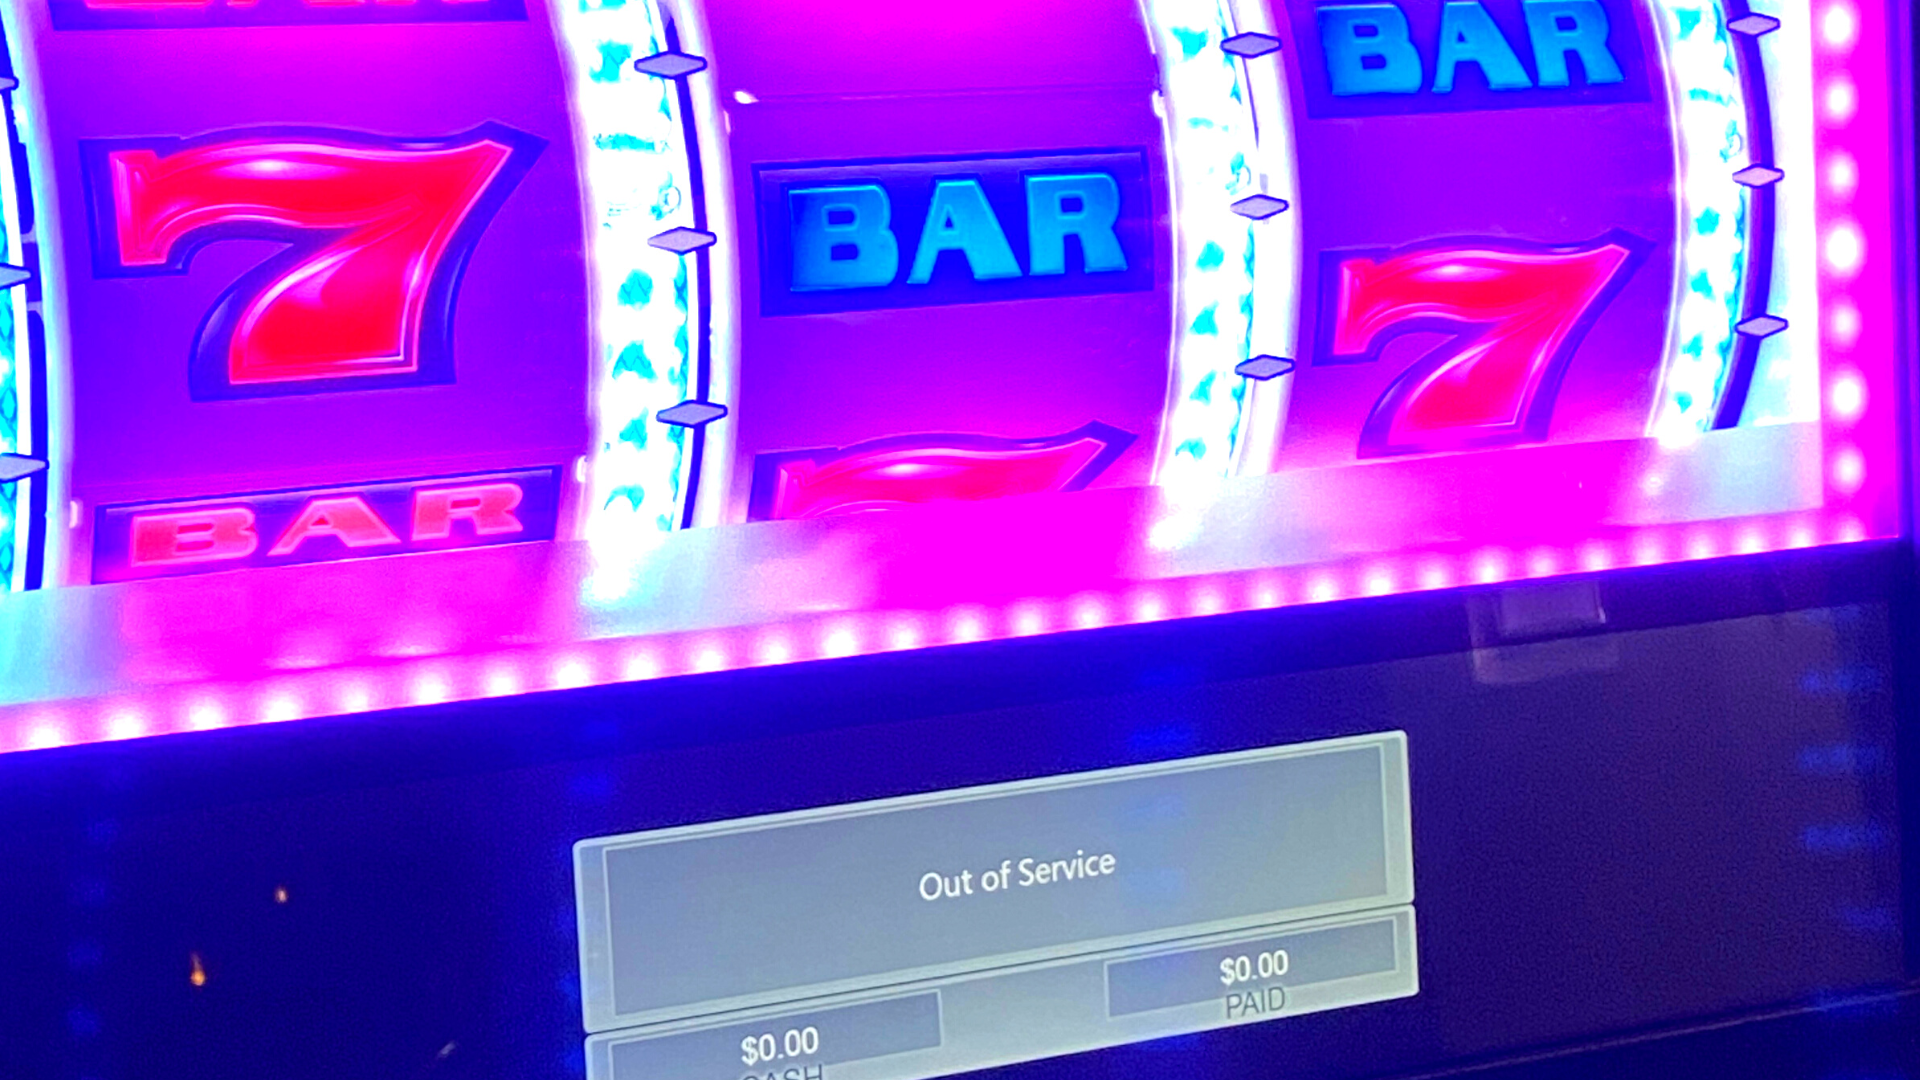 Las Vegas’s hottest new attraction is an interactive ransomware exhibit, currently playing out across every MGM property in the city. To experience 